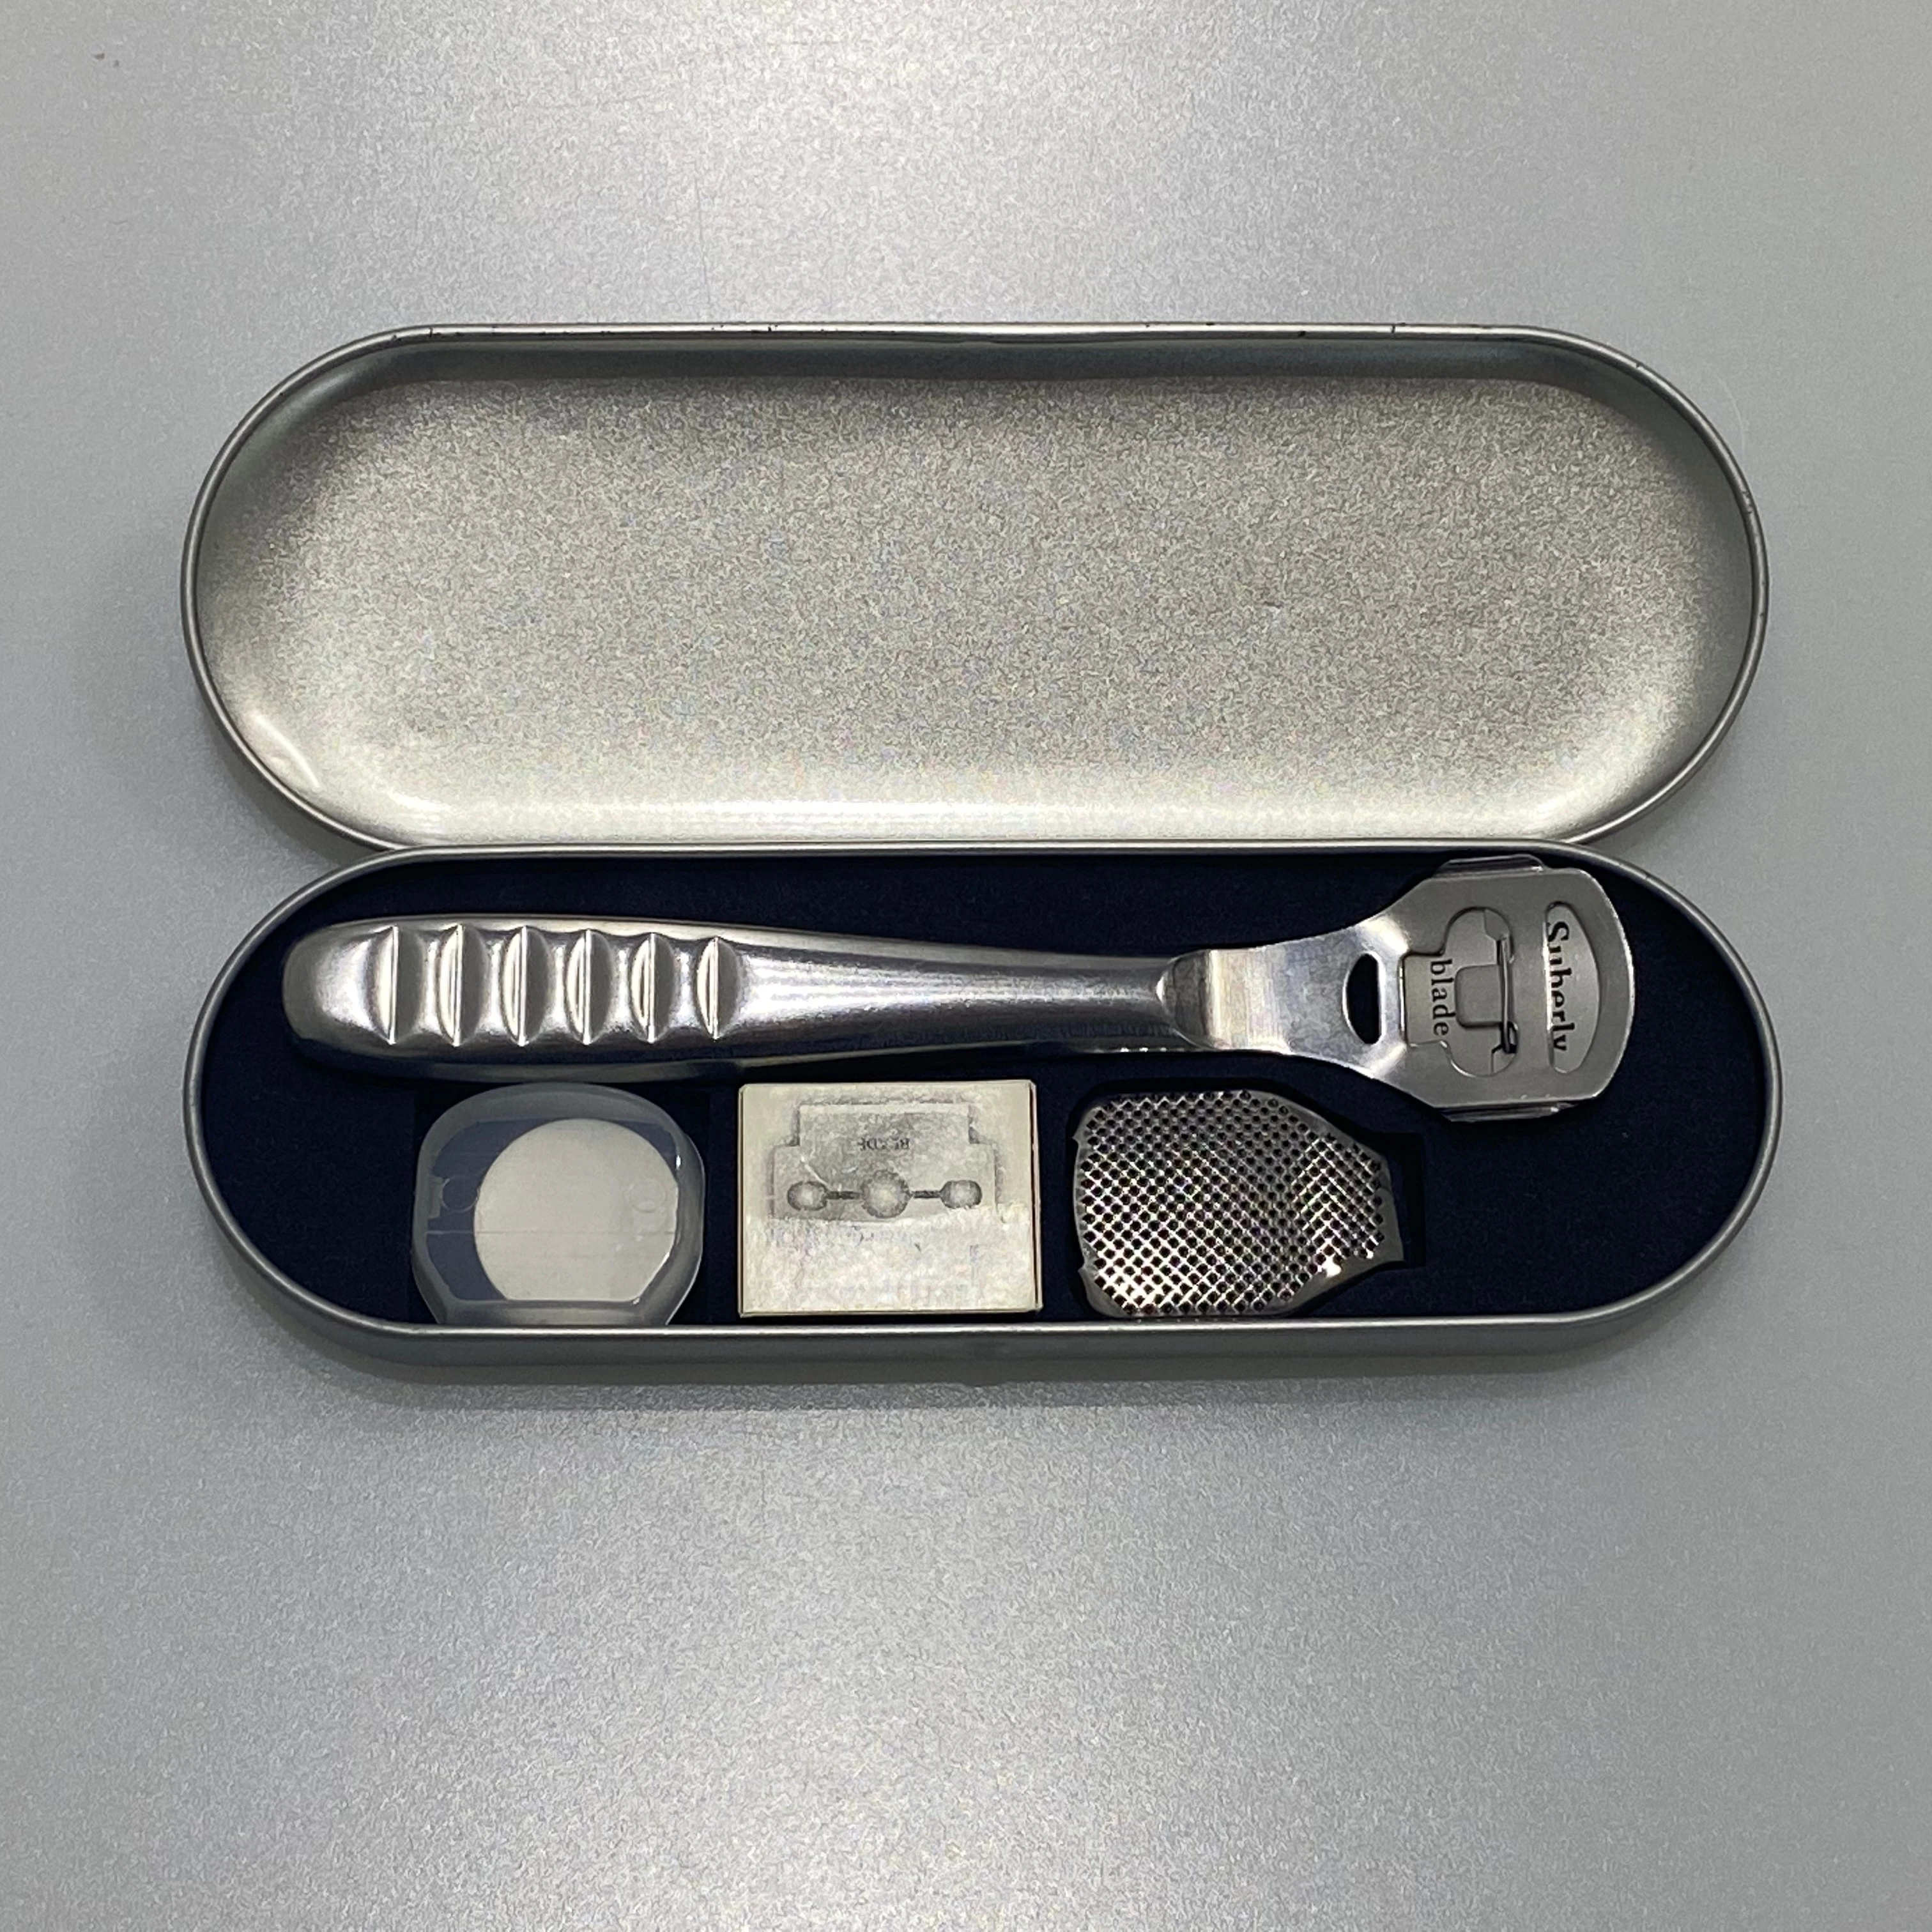 Easy To Carry Callus Shaver Set Knife Pedicure Tool With Metal Case Hot  Sale Stainless Steel Pedicure Knife - Buy Pedicure Tool,Callus Remover  Knife Pedicure Tool,Stainless Steel Pedicure Knife Product on Alibaba.com